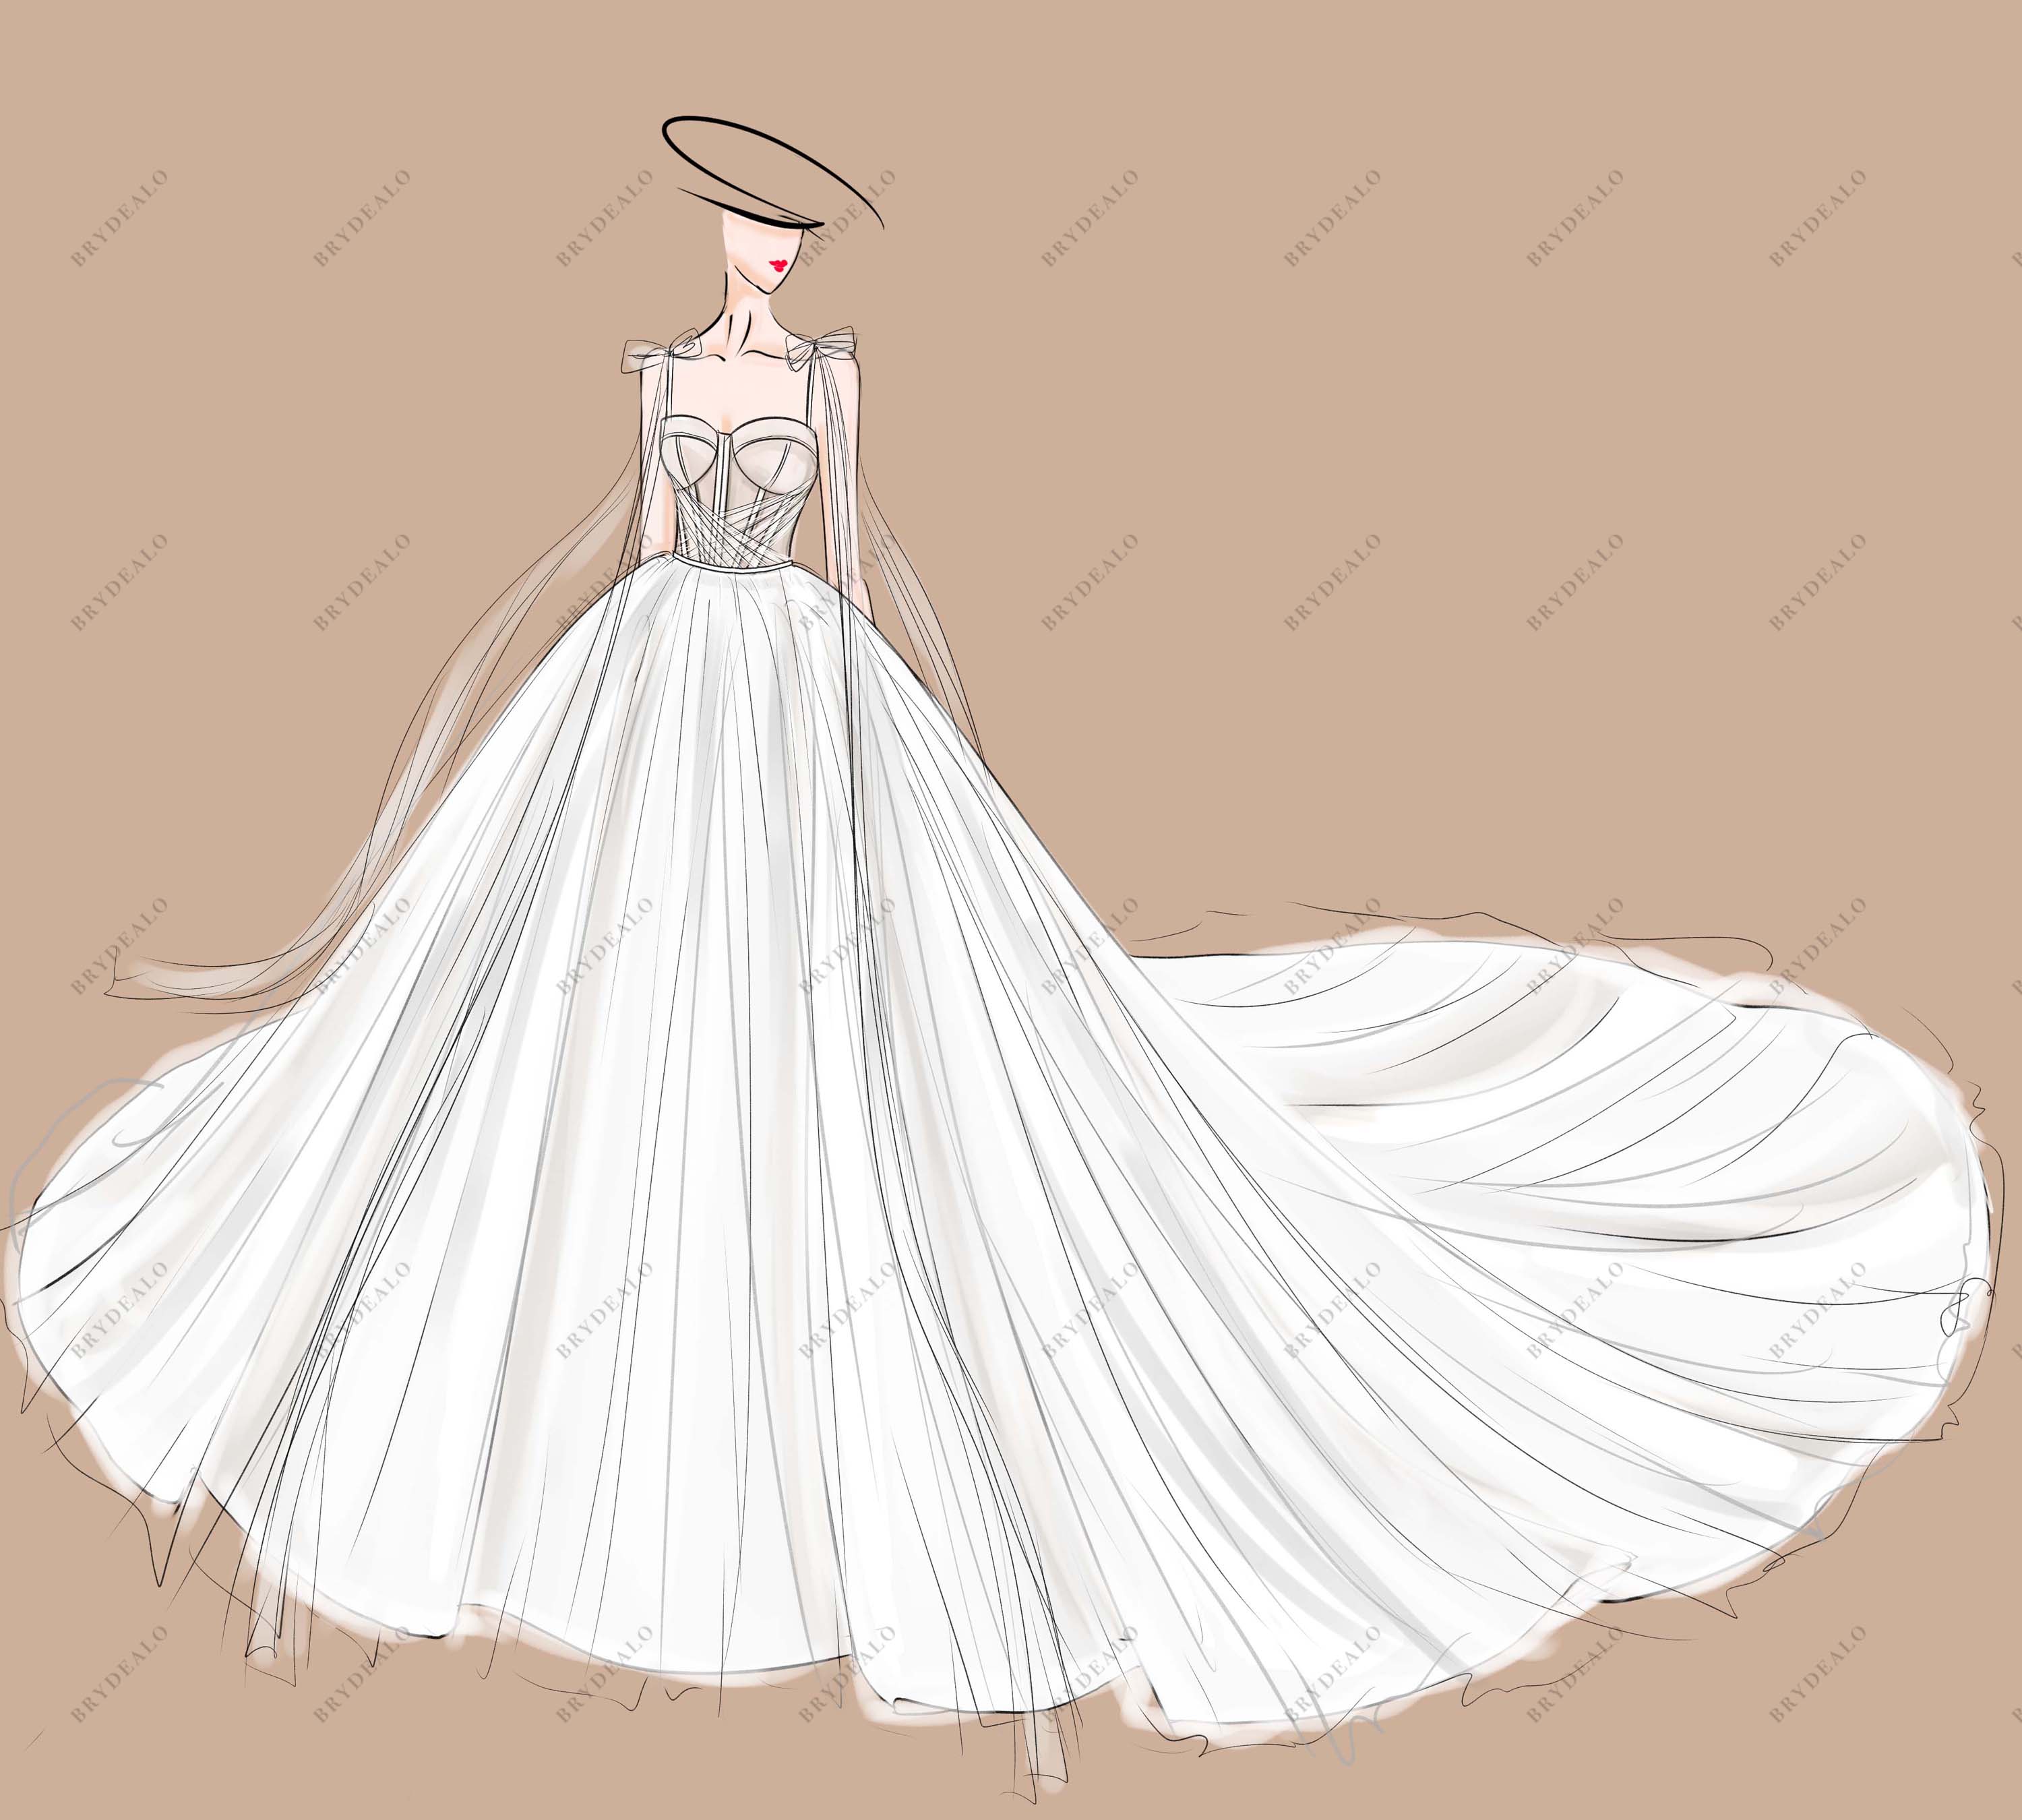 Fashion illustration of model wearing evening gown Stock Images